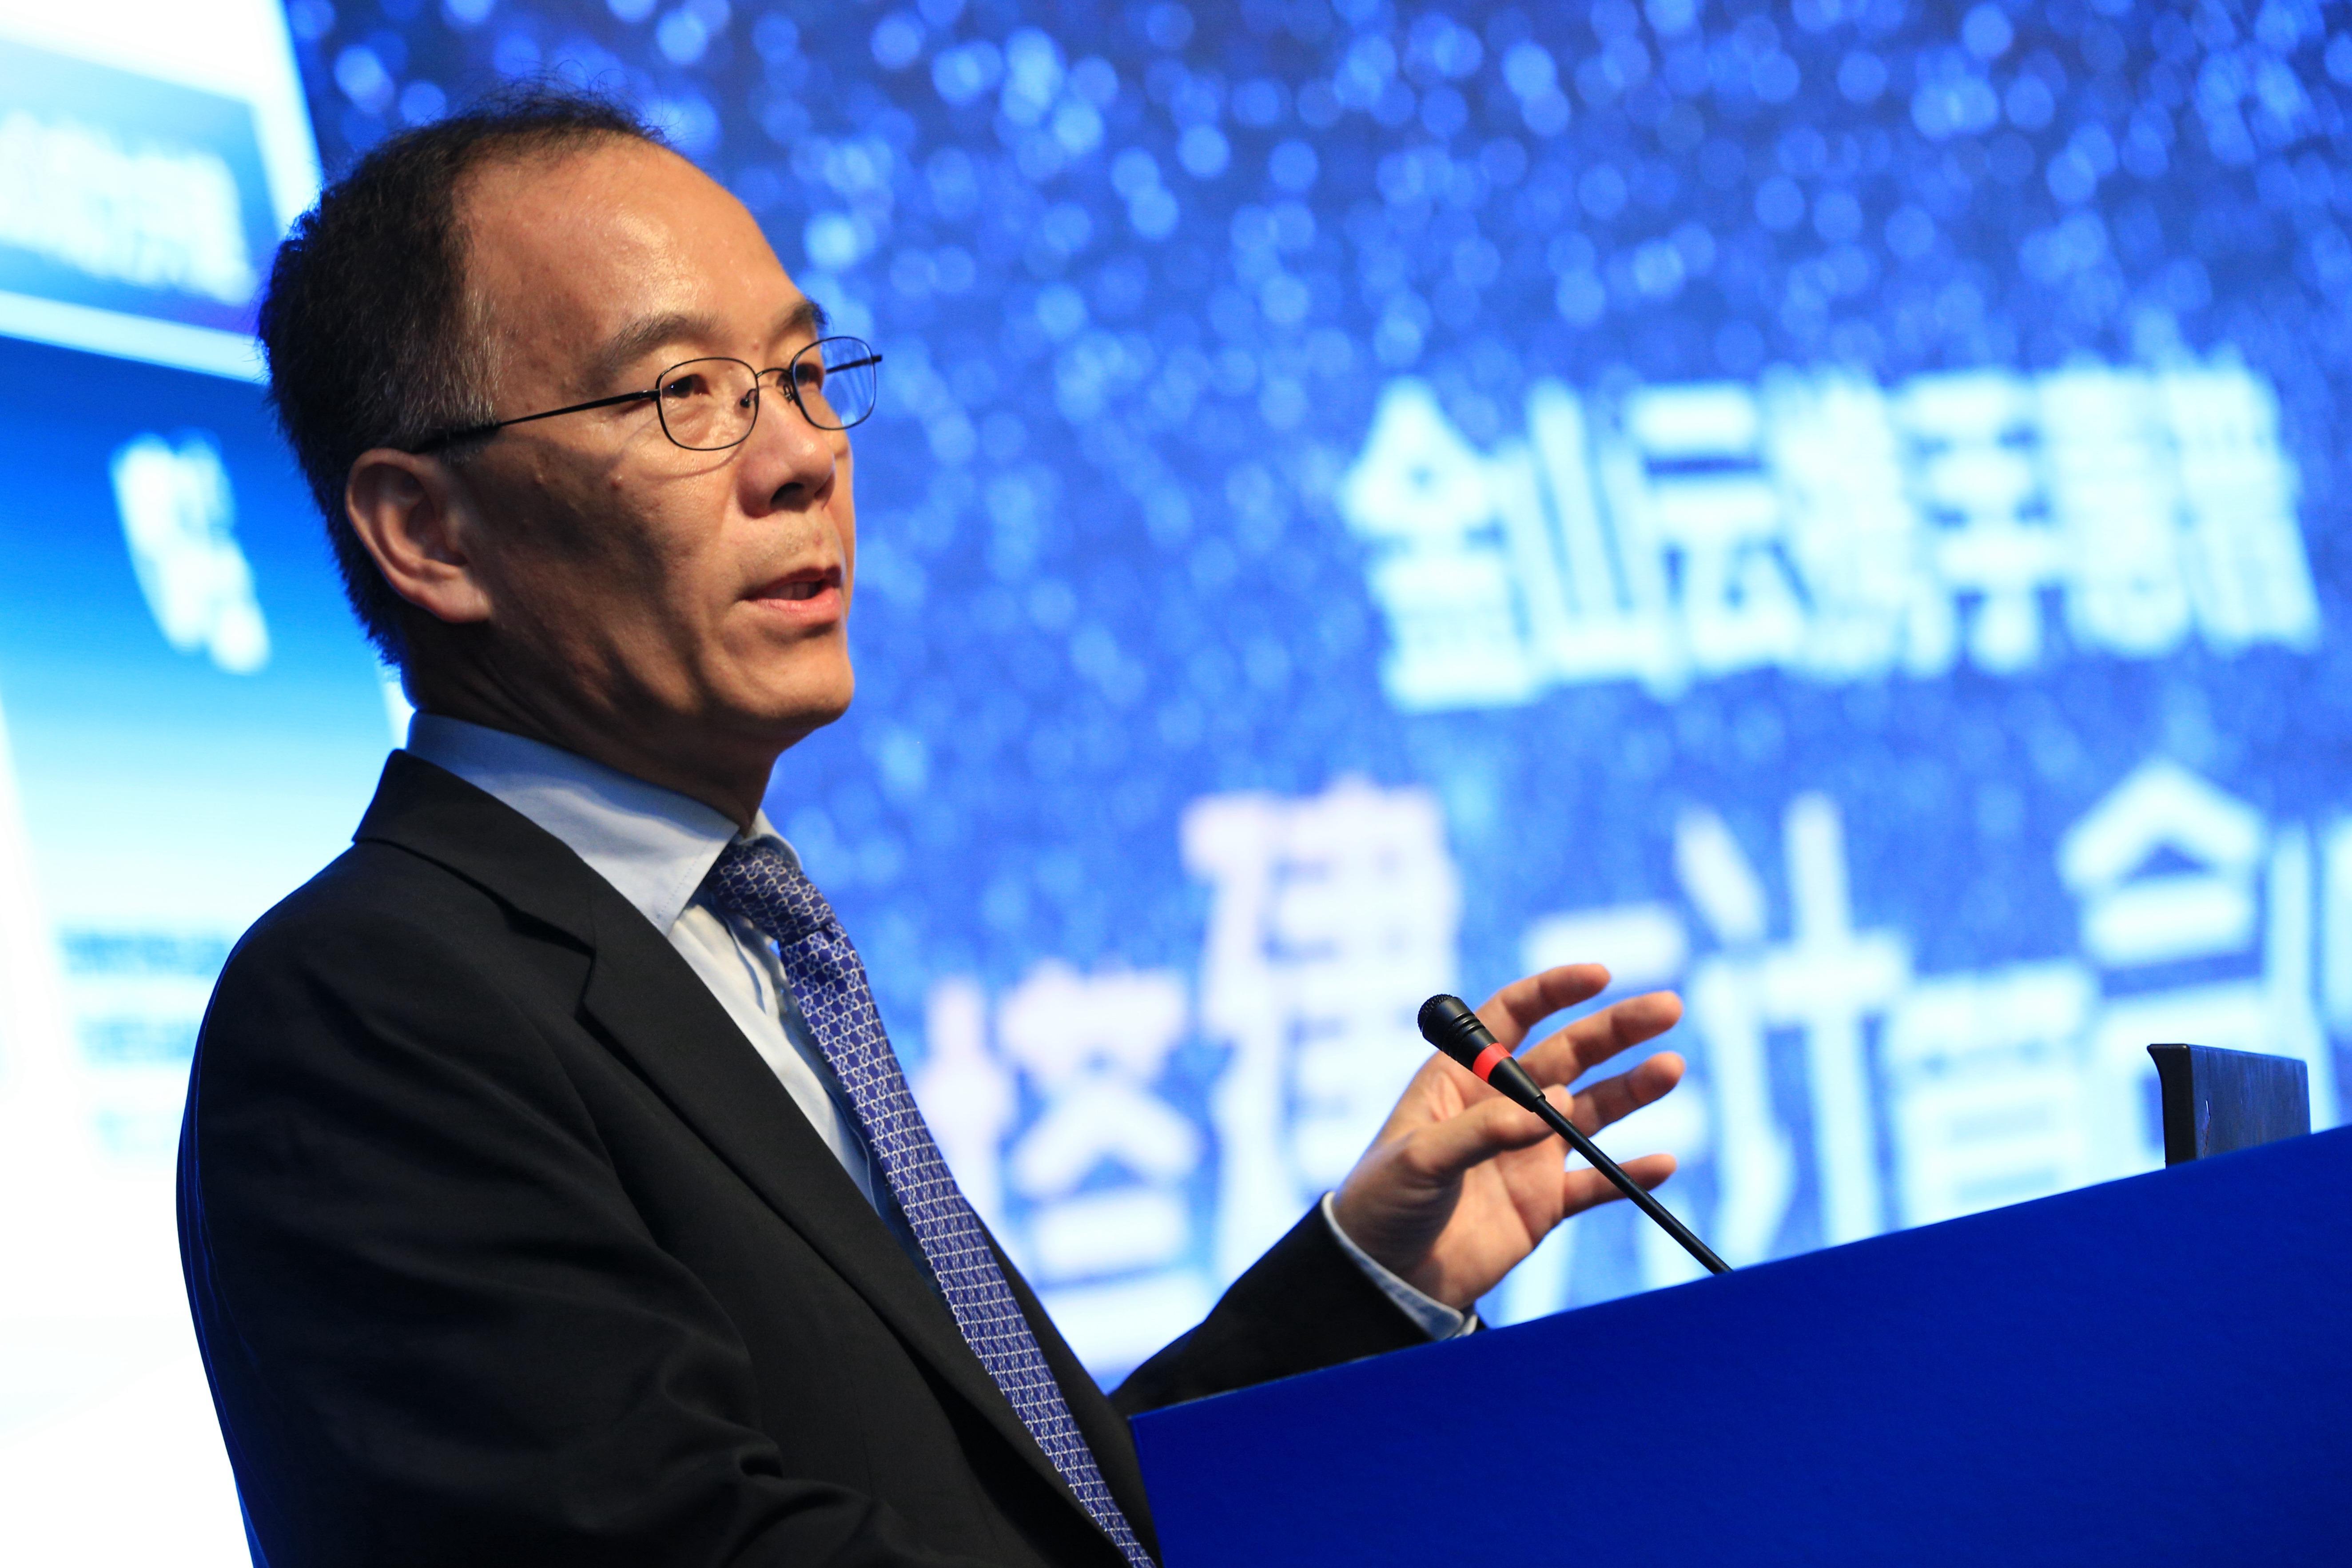 Dr. Hongjiang Zhang, CEO of Kingsoft and former Managing Director of Microsoft Advanced Technology Center (ATC), attends the 14th China Internet Conference (CIC) in Beijing, China.